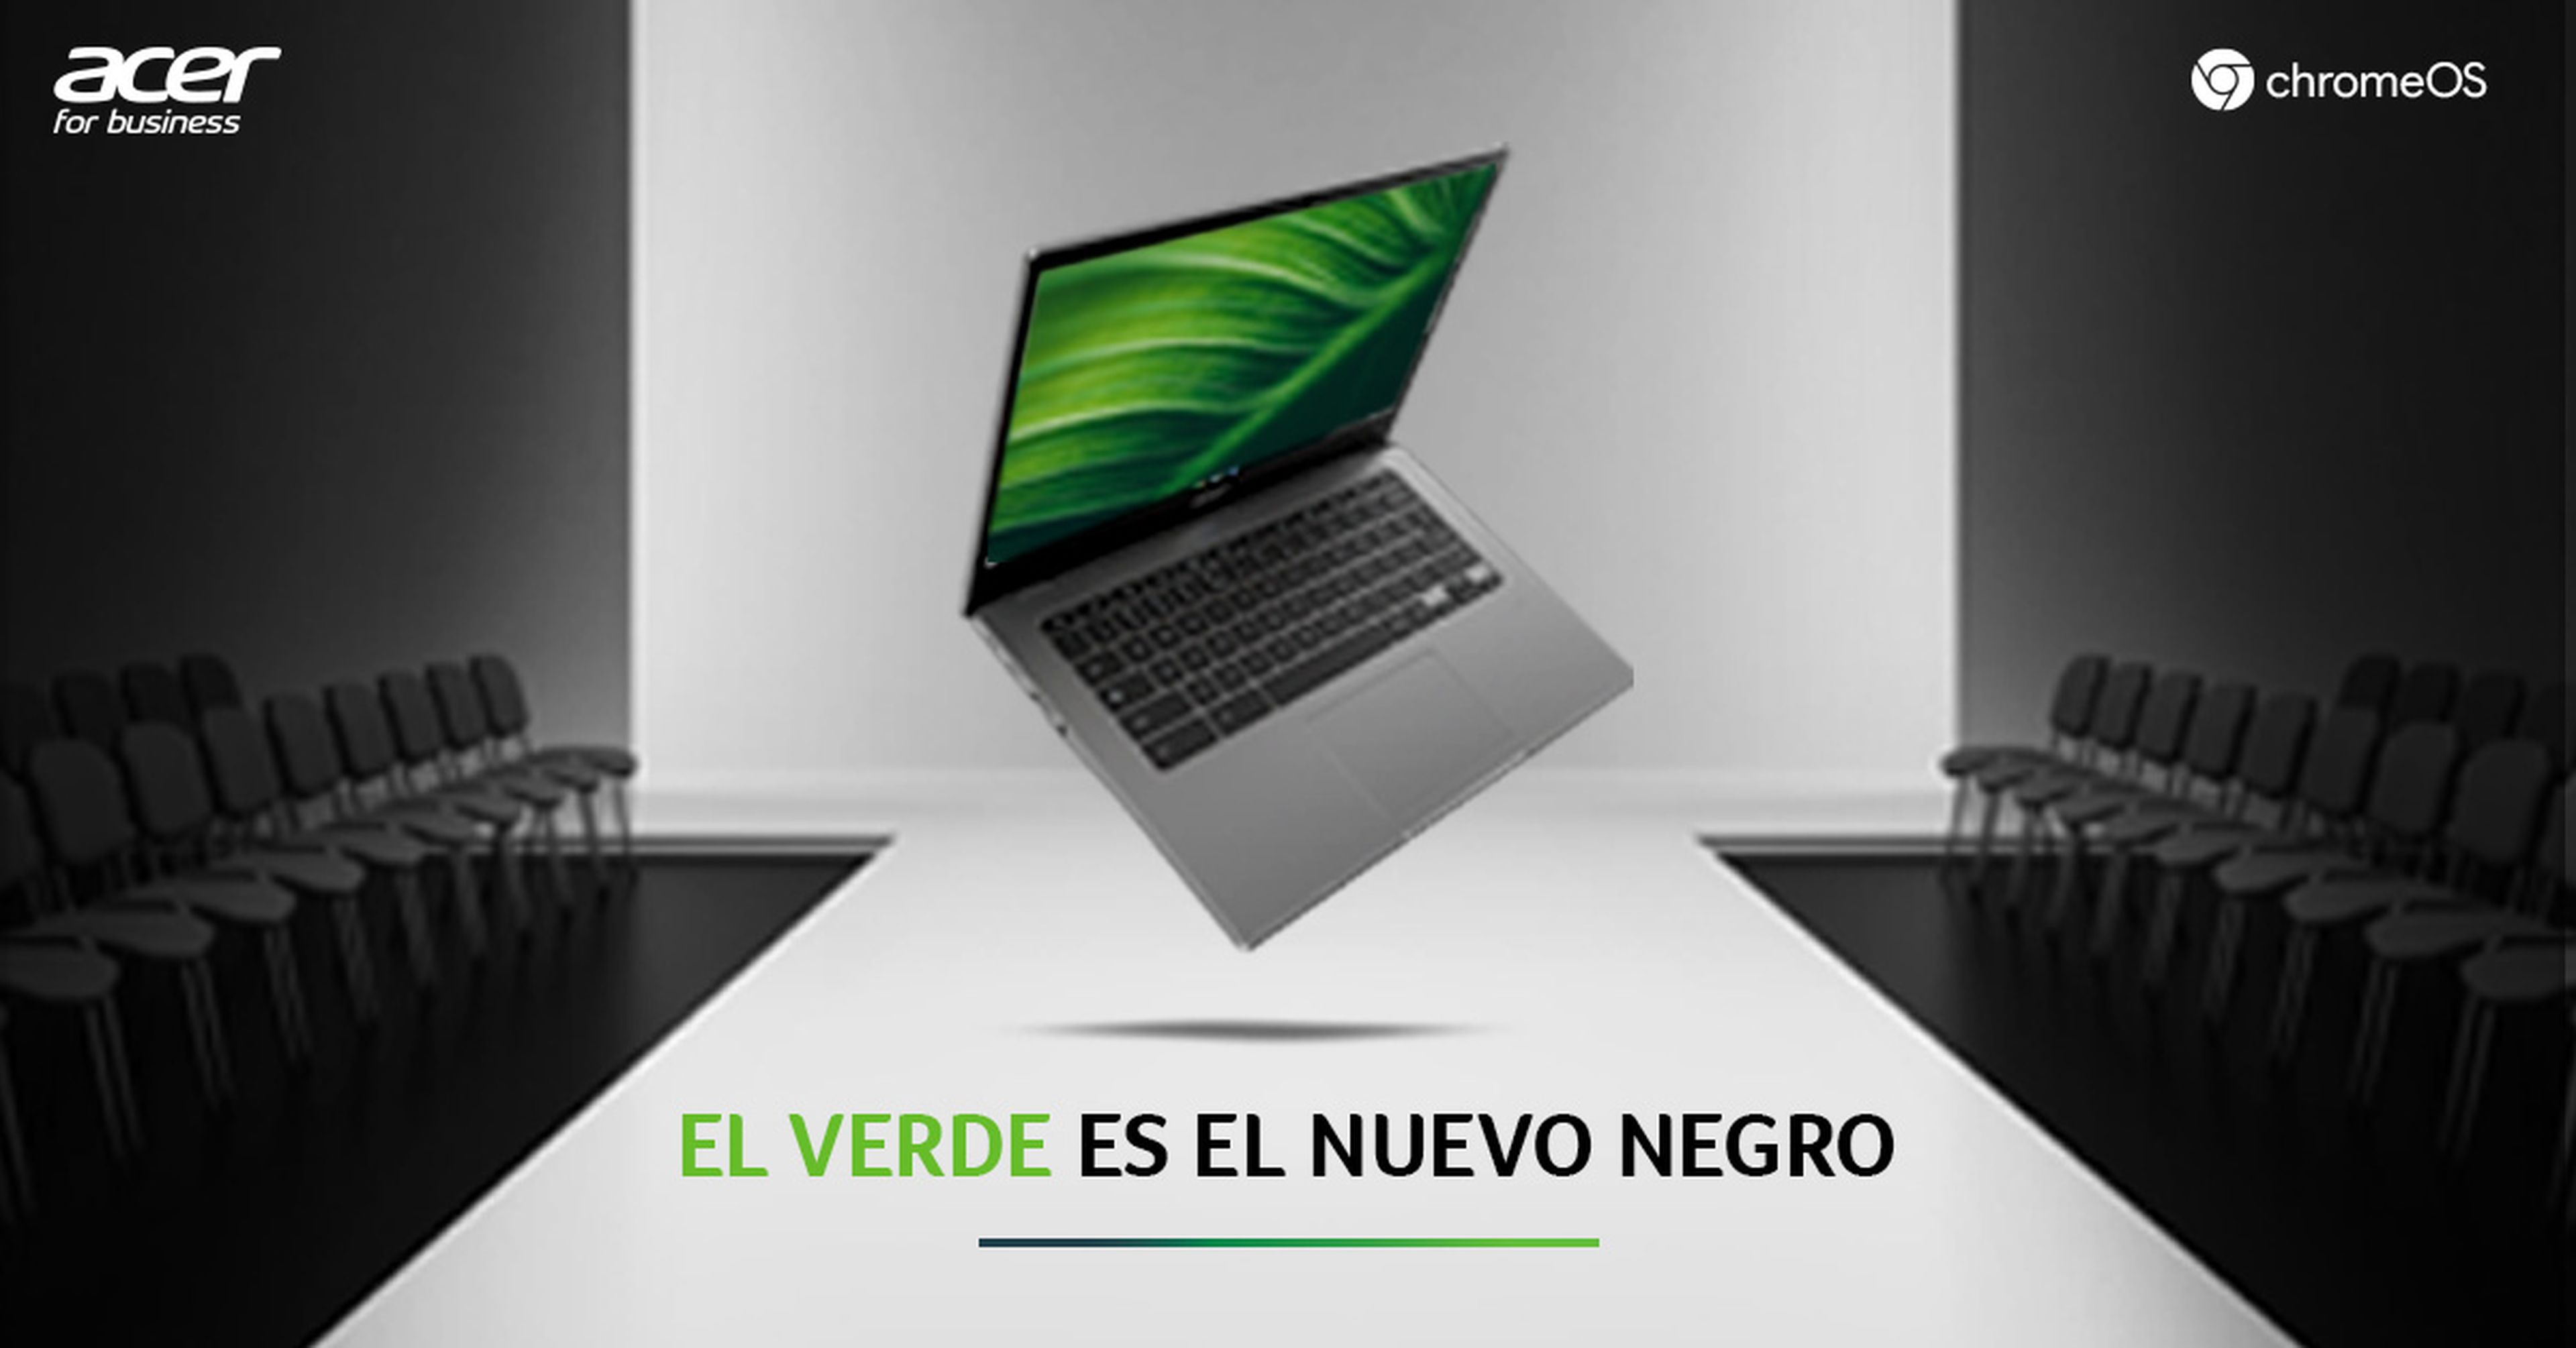 ACER BUSINESS